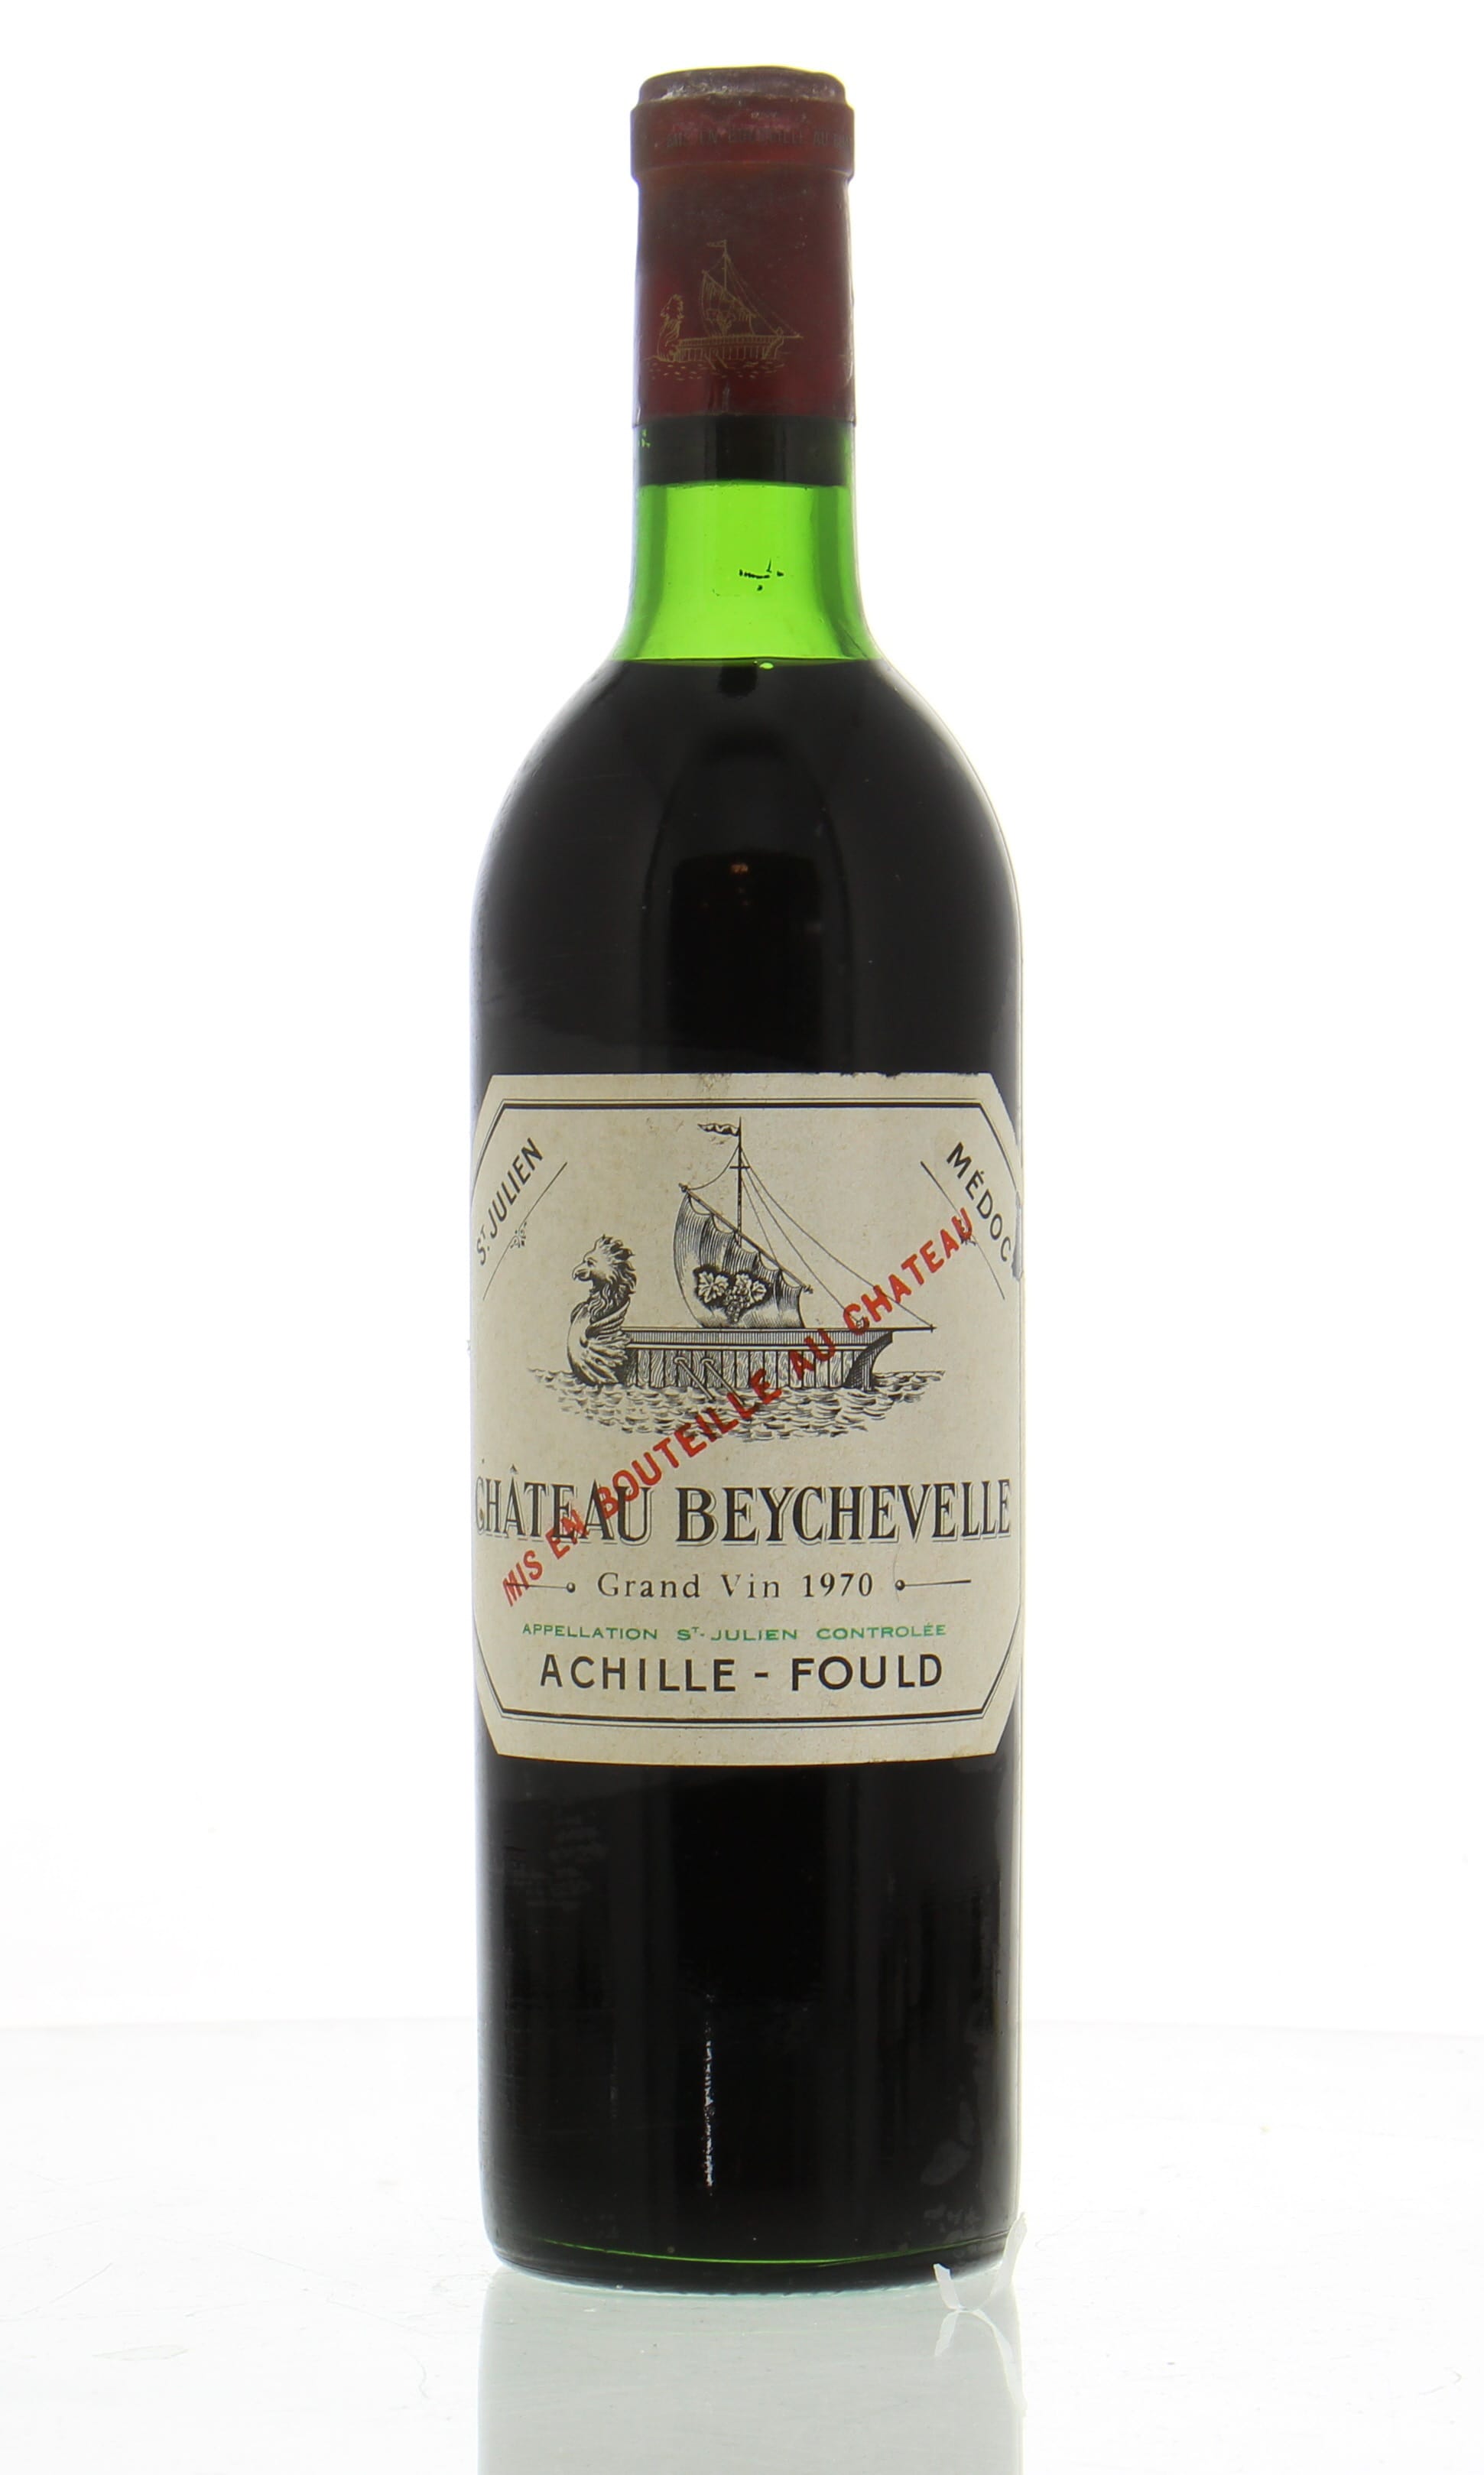 Chateau Beychevelle - Chateau Beychevelle 1970 Top shoulder